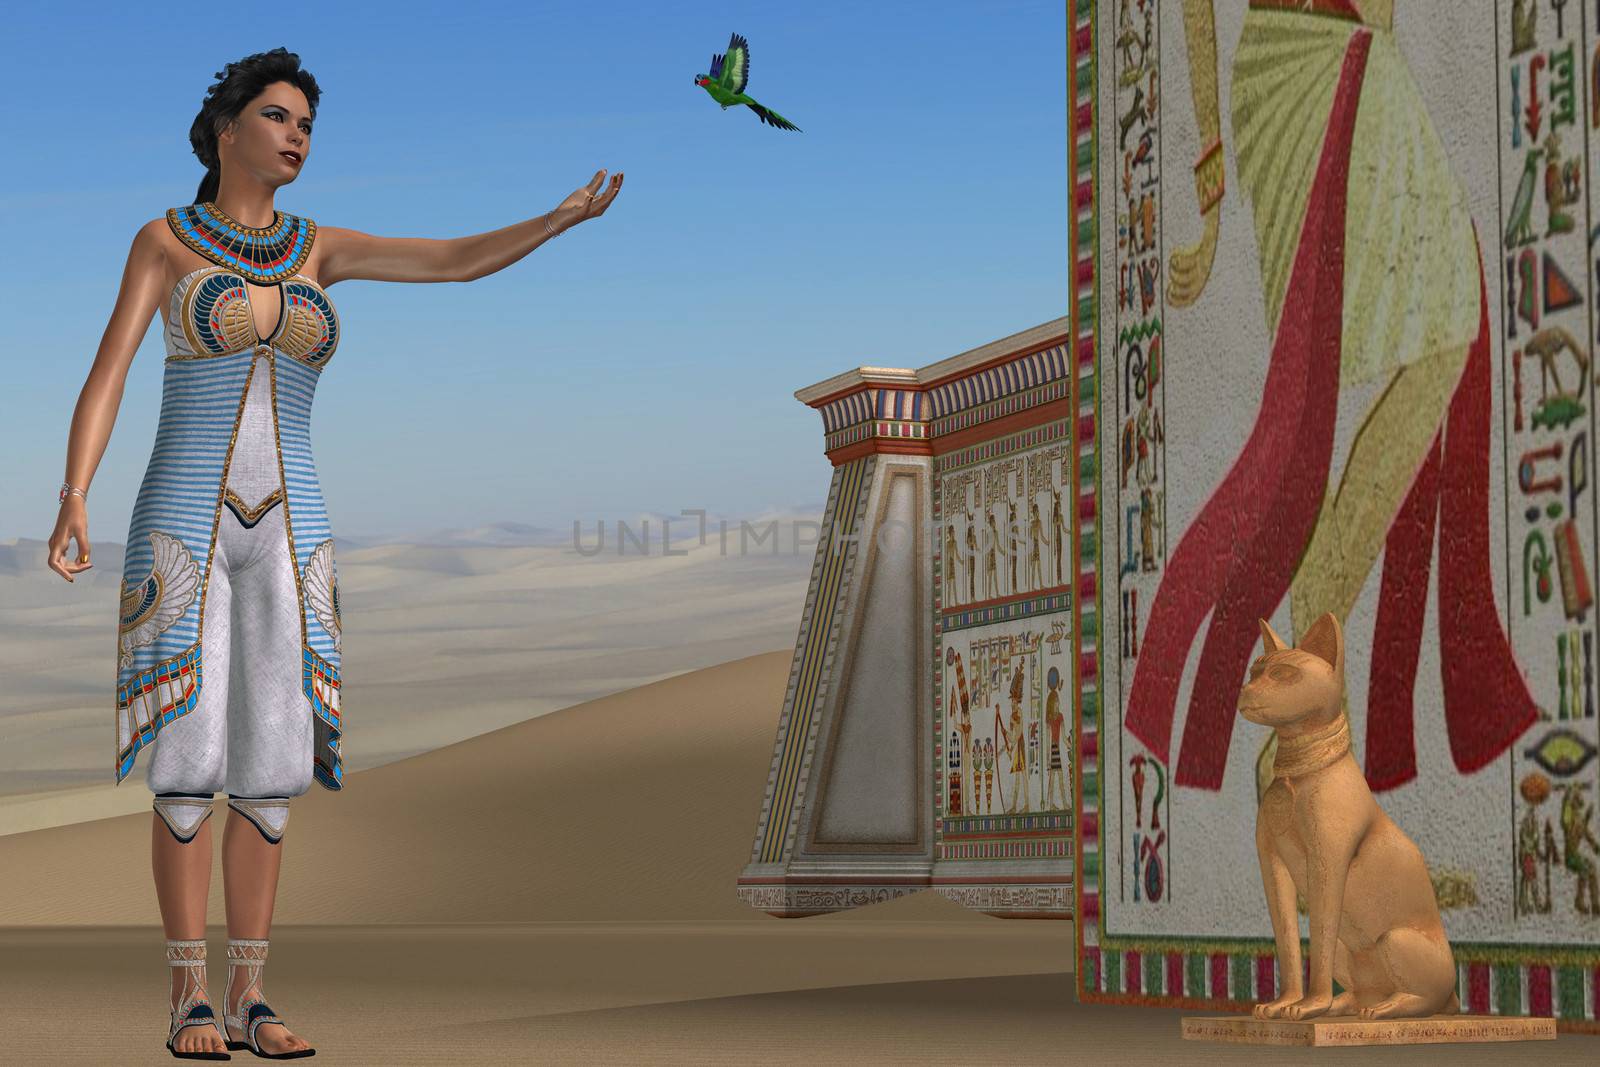 Amunet, an Egyptian queen, plays with her green parrot in ancient Egypt.